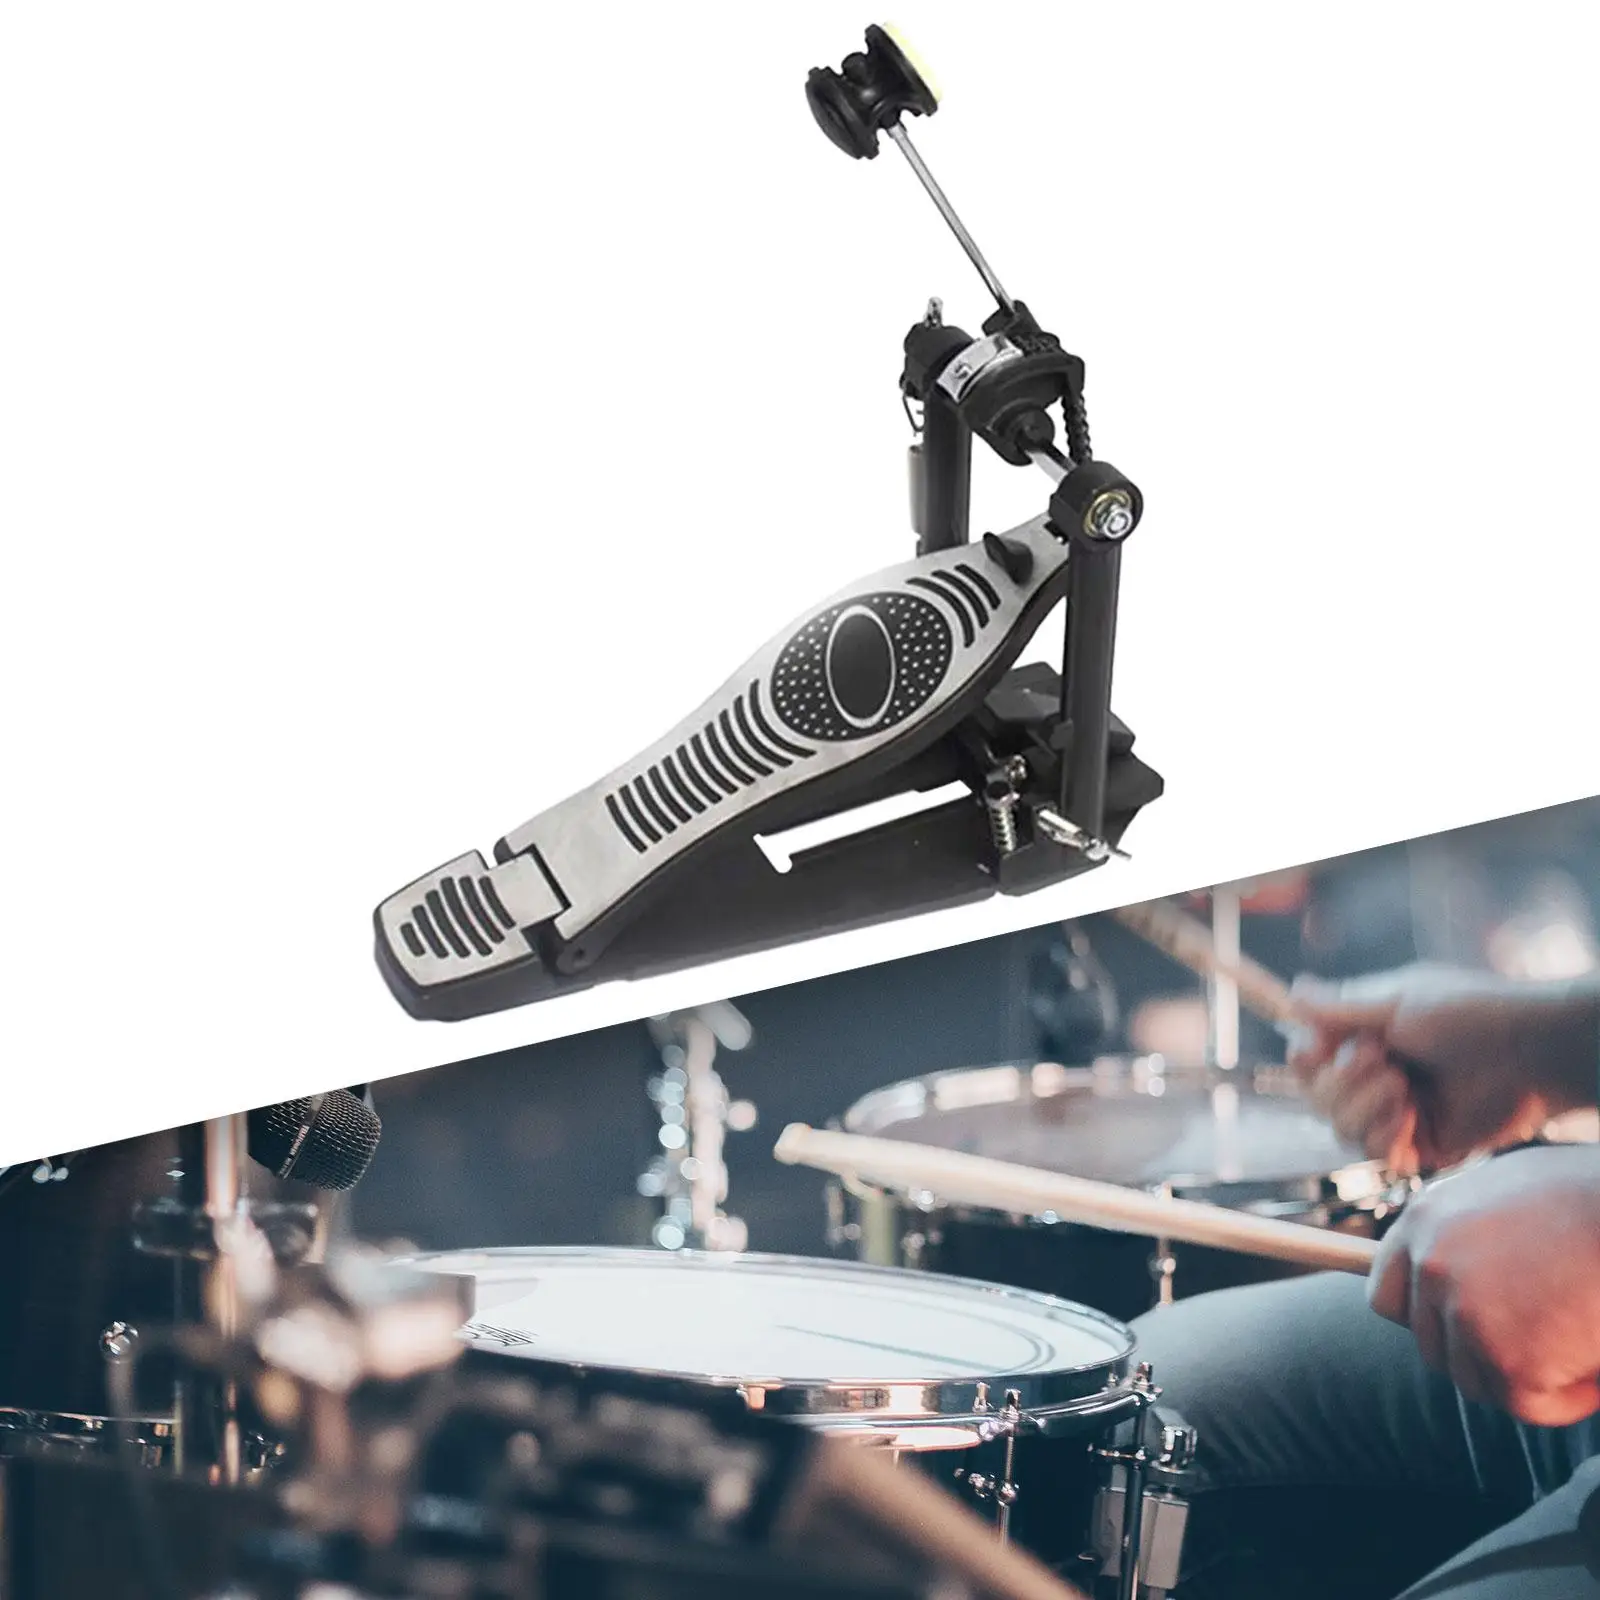 

Bass Drum Pedal Drum Practice for Electronic Drums Kick Drum Set Replacement